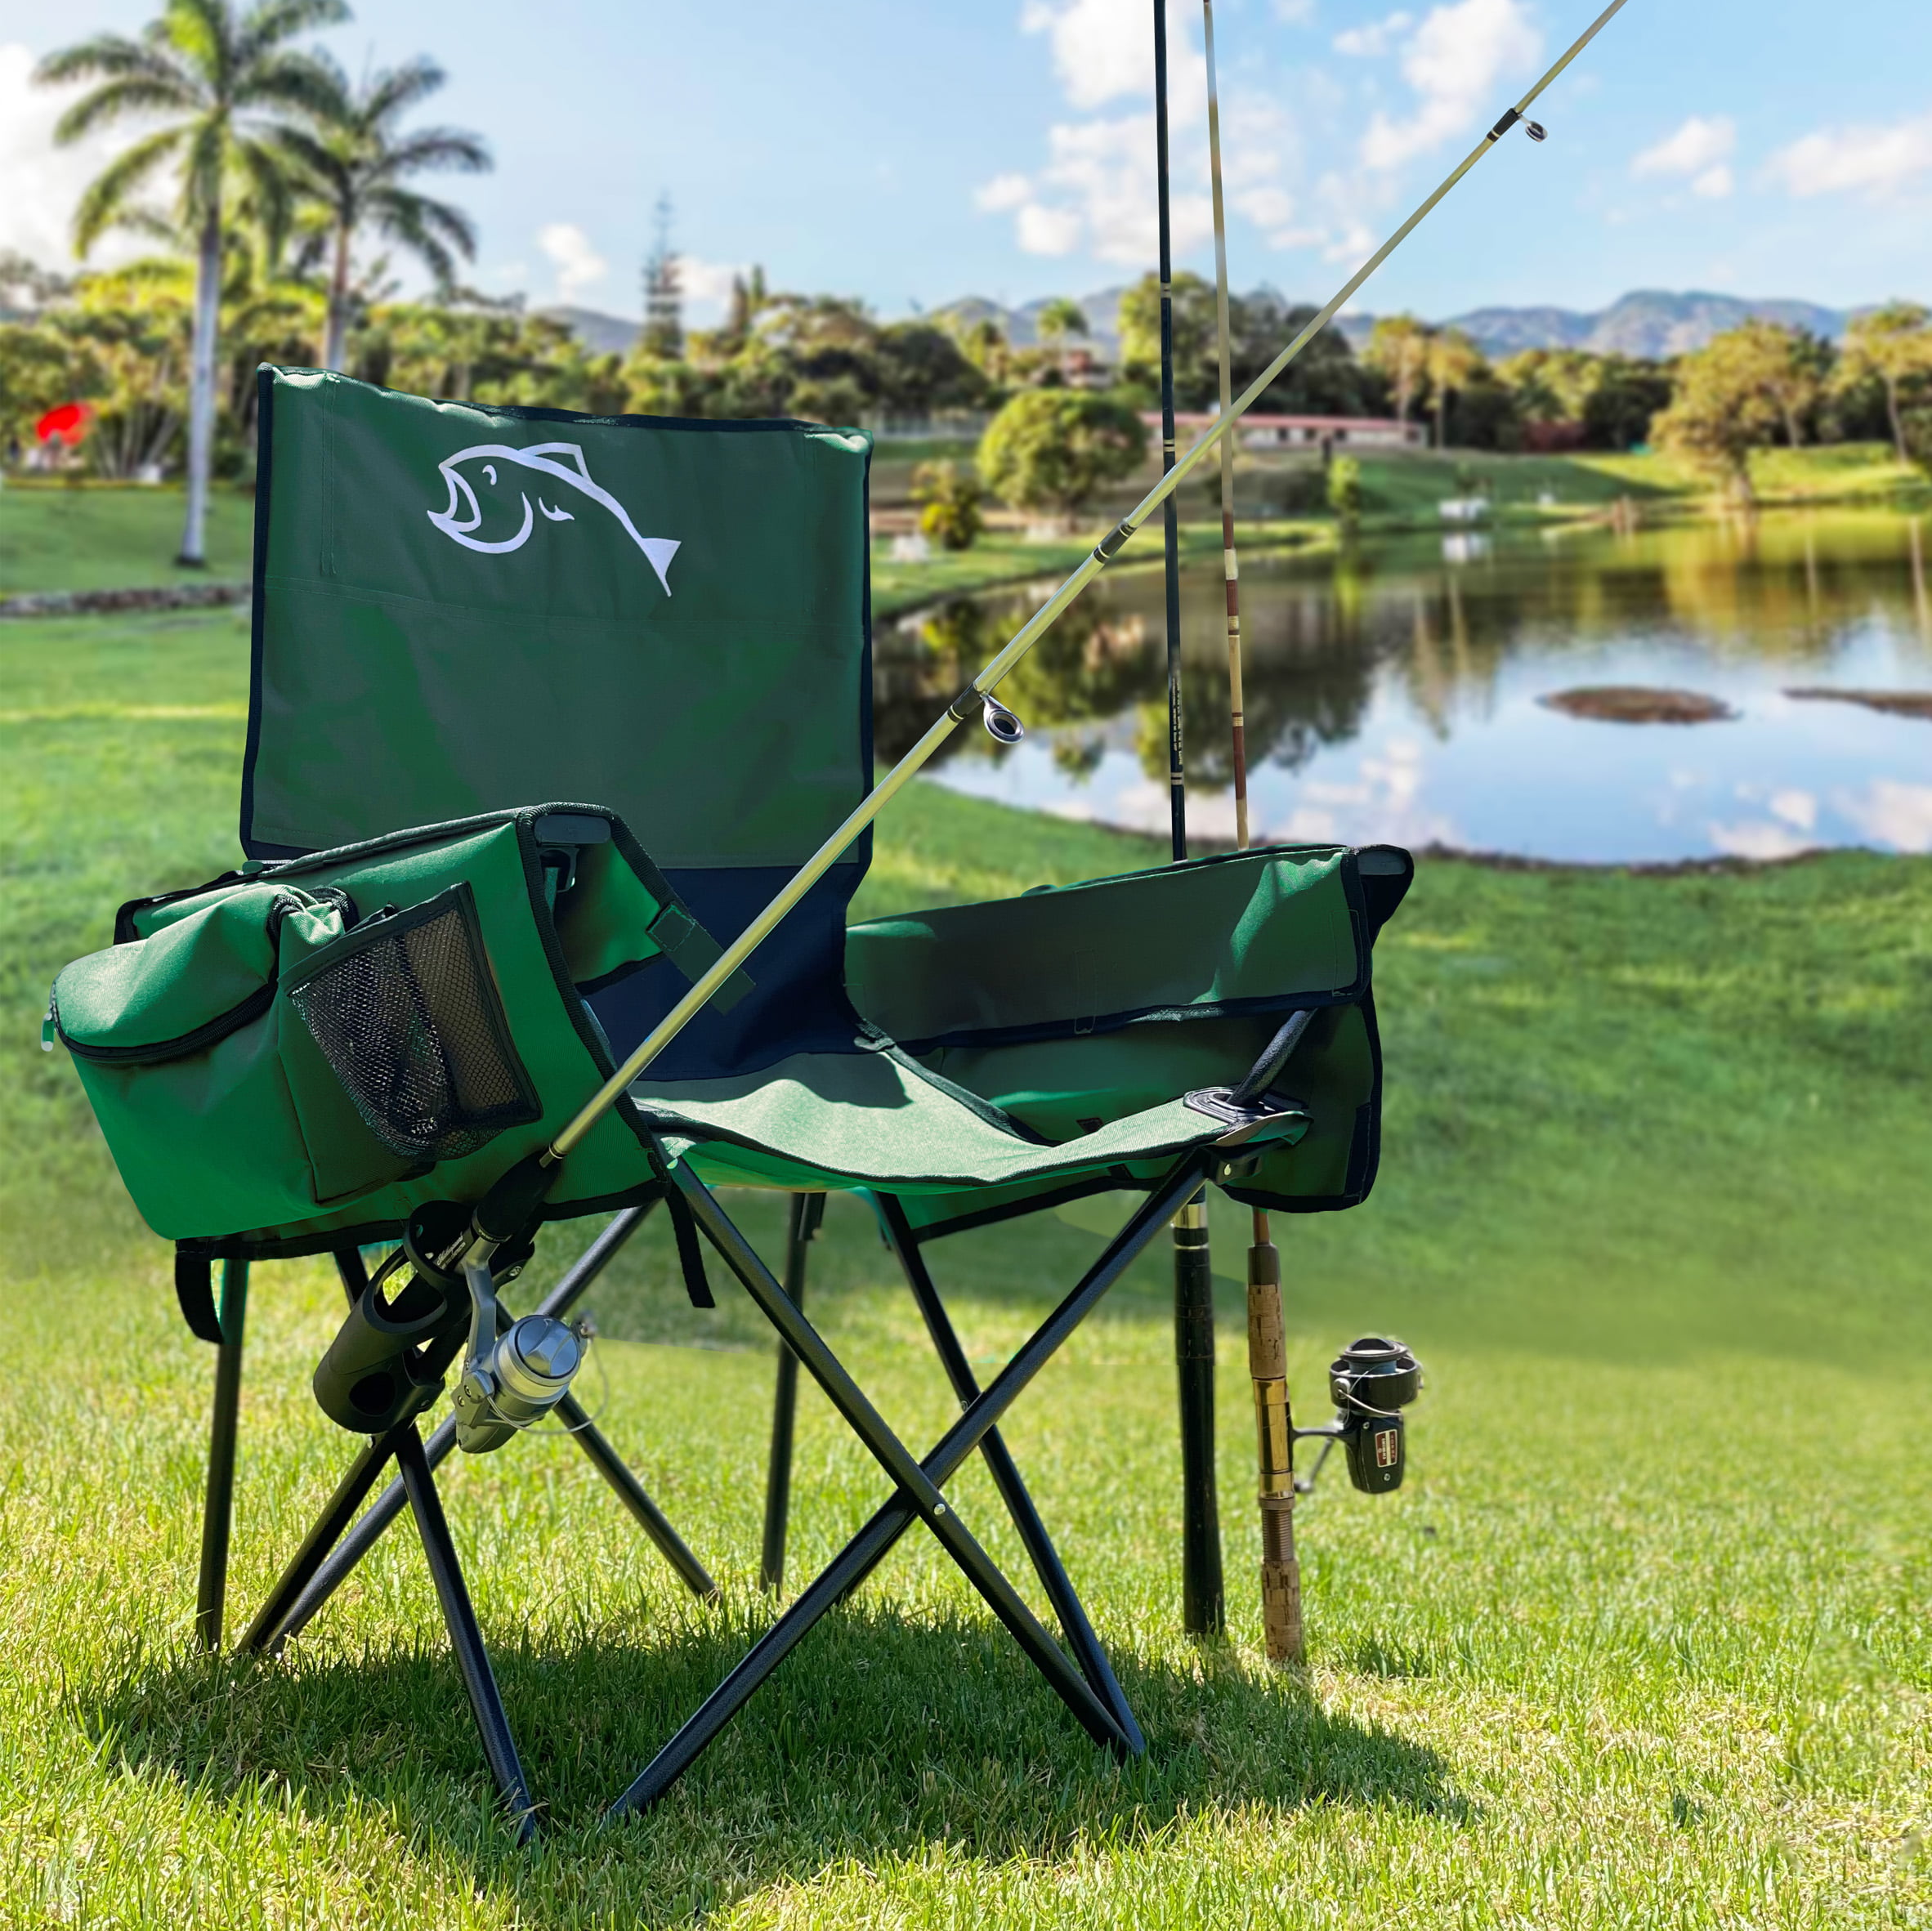 Fishing Chair with Rod Holder Built In Cooler Hands Free Fishing Pole  Holder - Storage Pouch Storage Bag for Fishing Accessories Full Size  Portable 